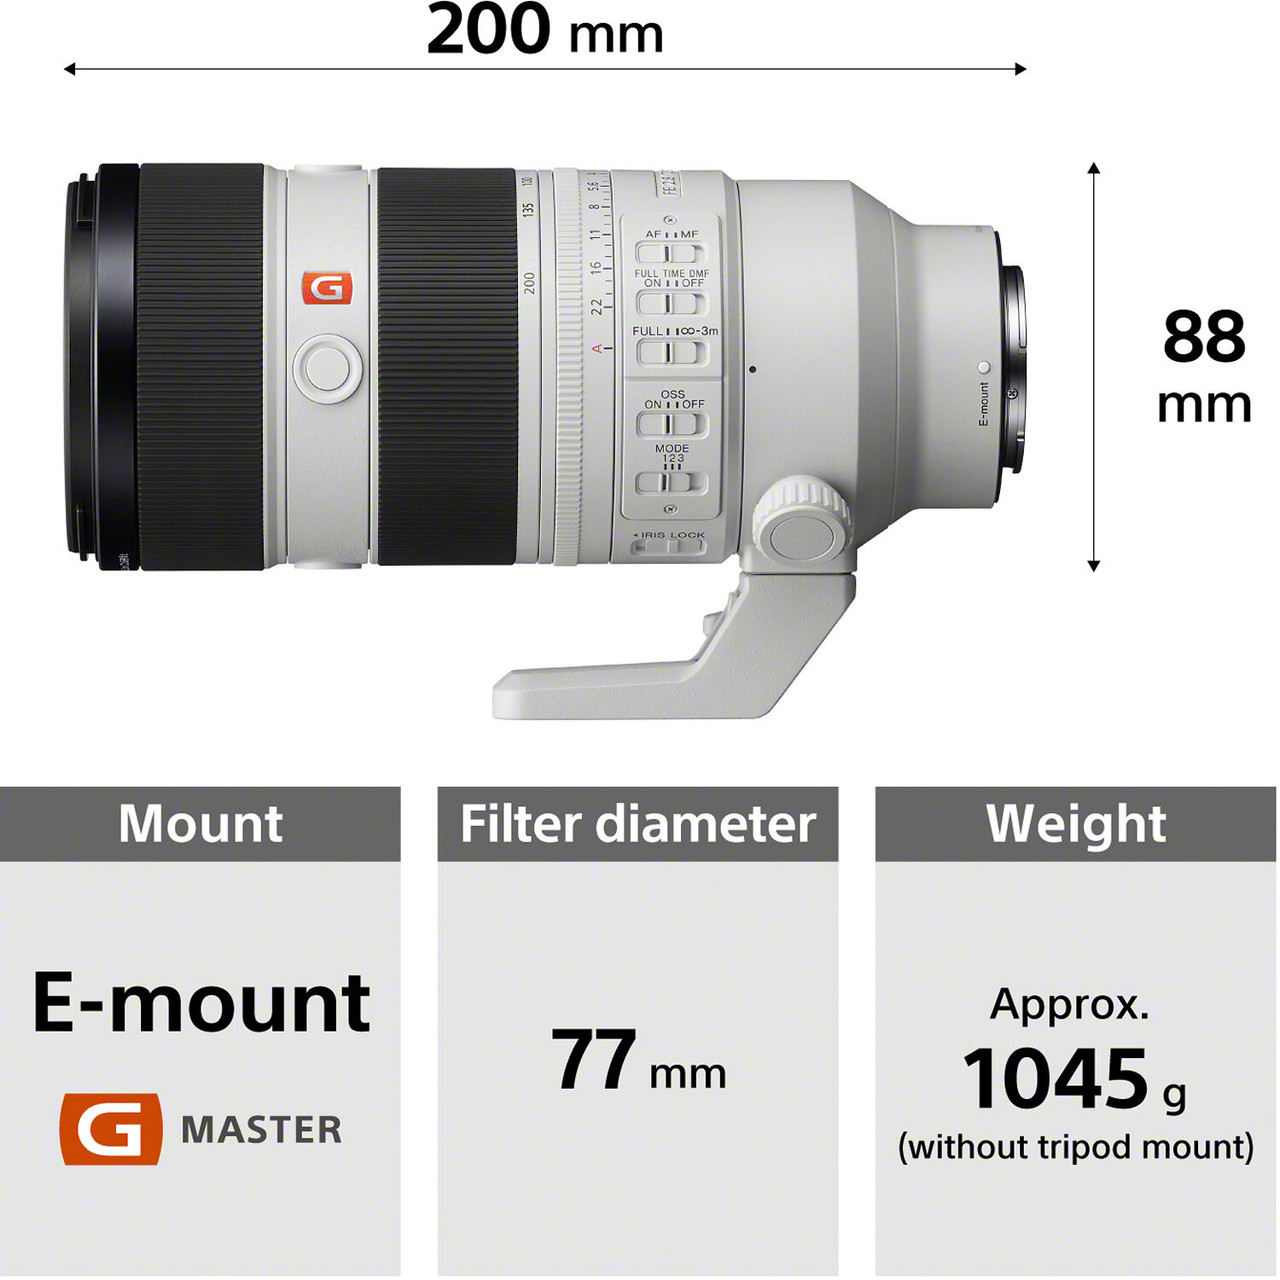 Sigma 70-200 f/2.8 DG OS HSM  S vs Sony FE 70-200mm F2.8 GM OSS: What is  the difference?